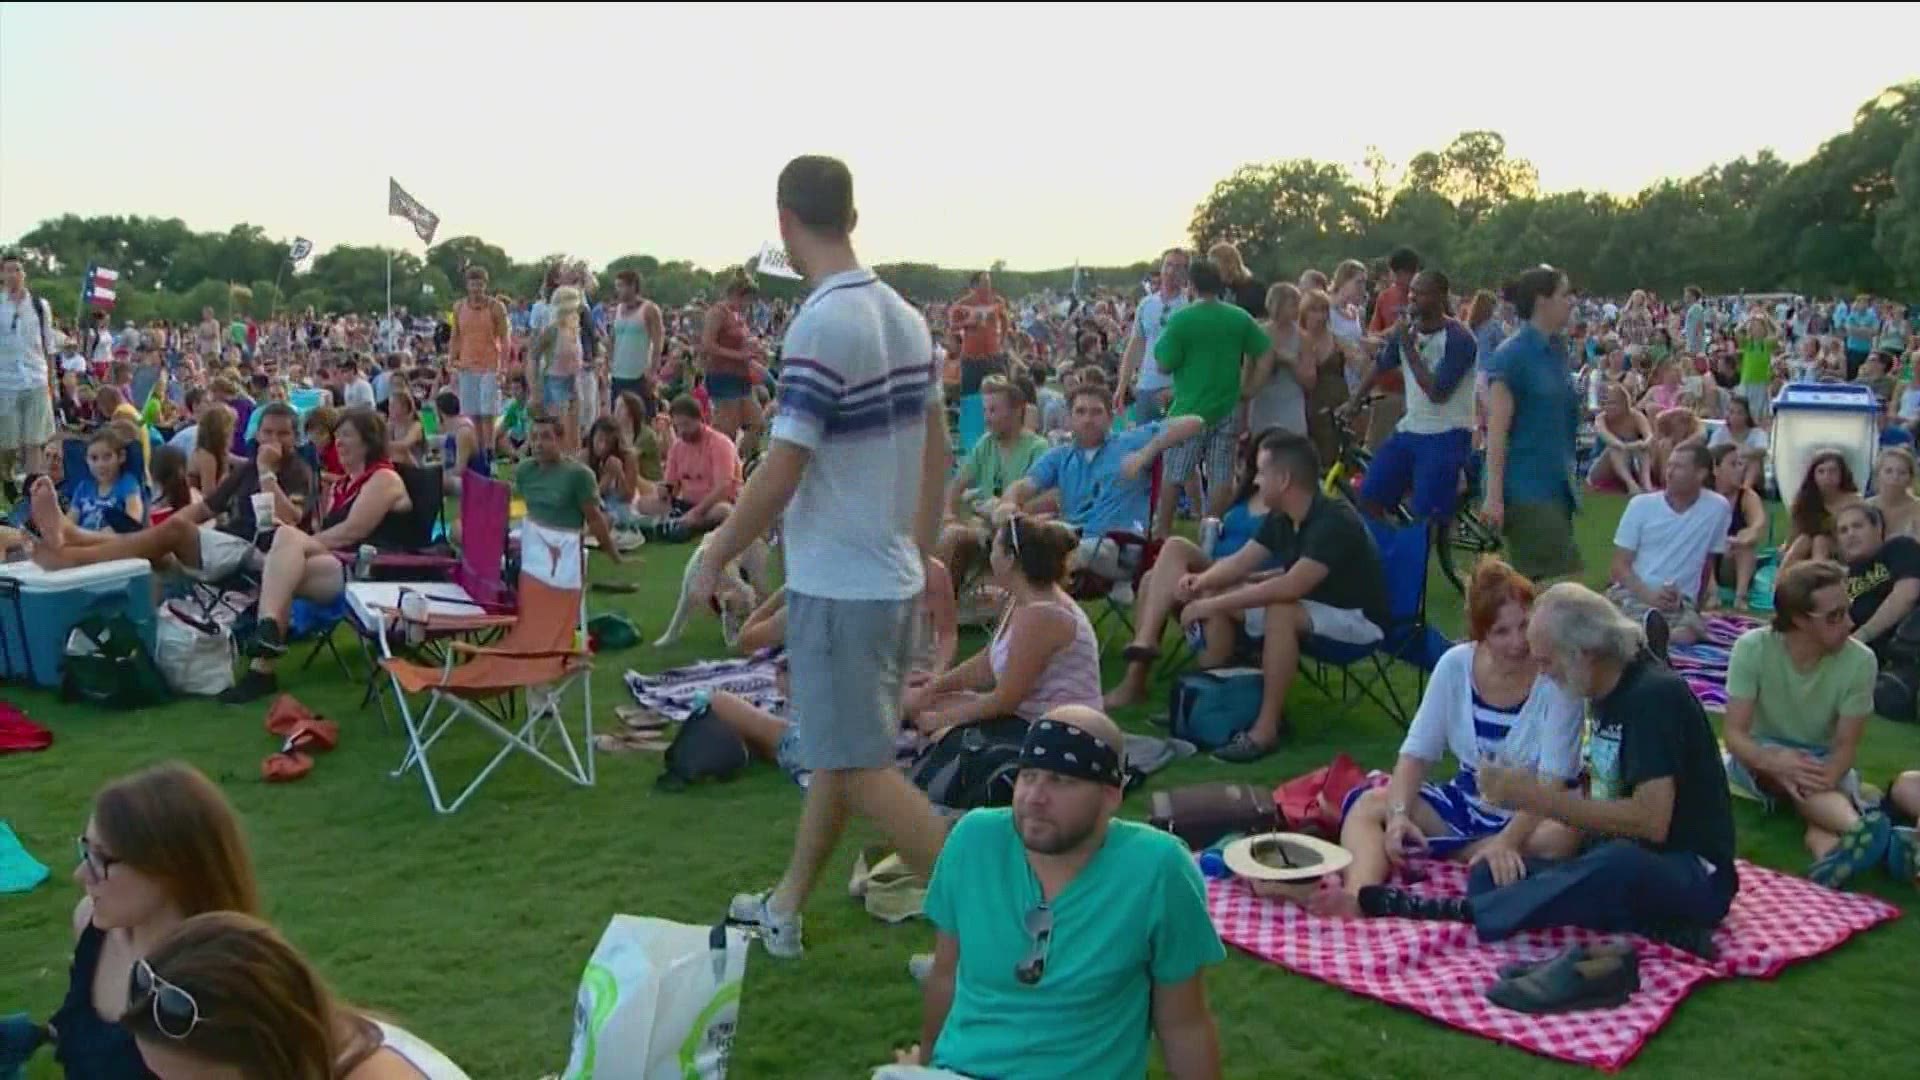 The popular summer concert series is returning to Zilker Park for its 30th year.